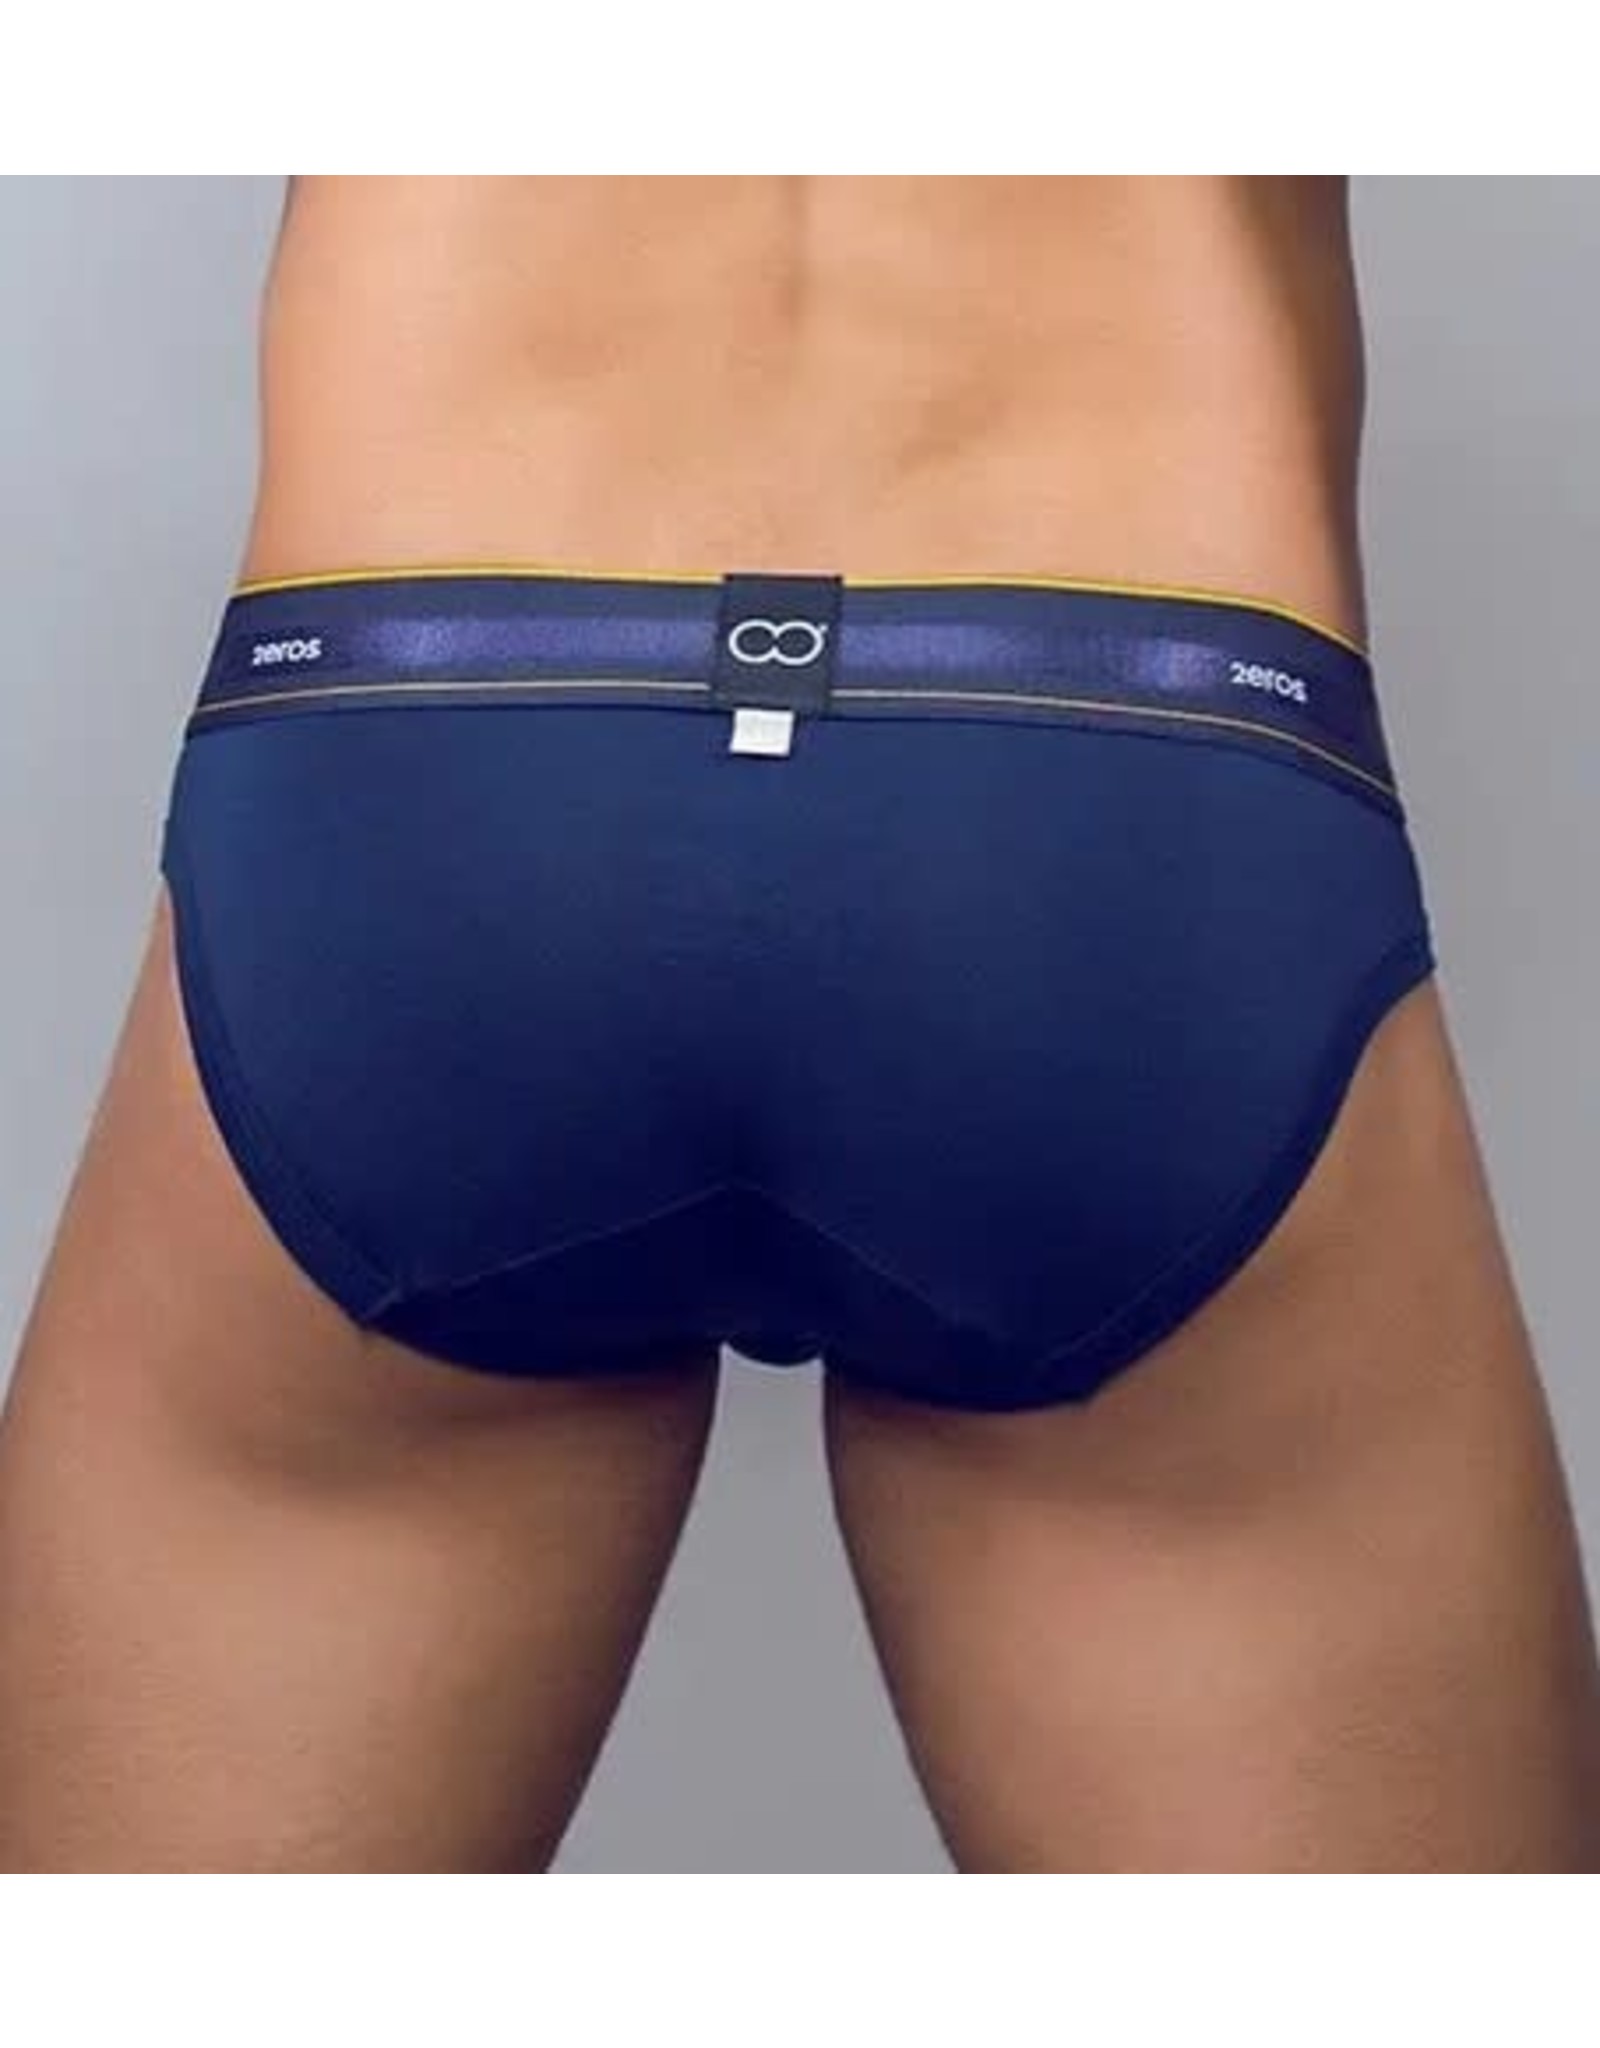 NEW Egyptian cotton Adonis underwear features the CURV technology